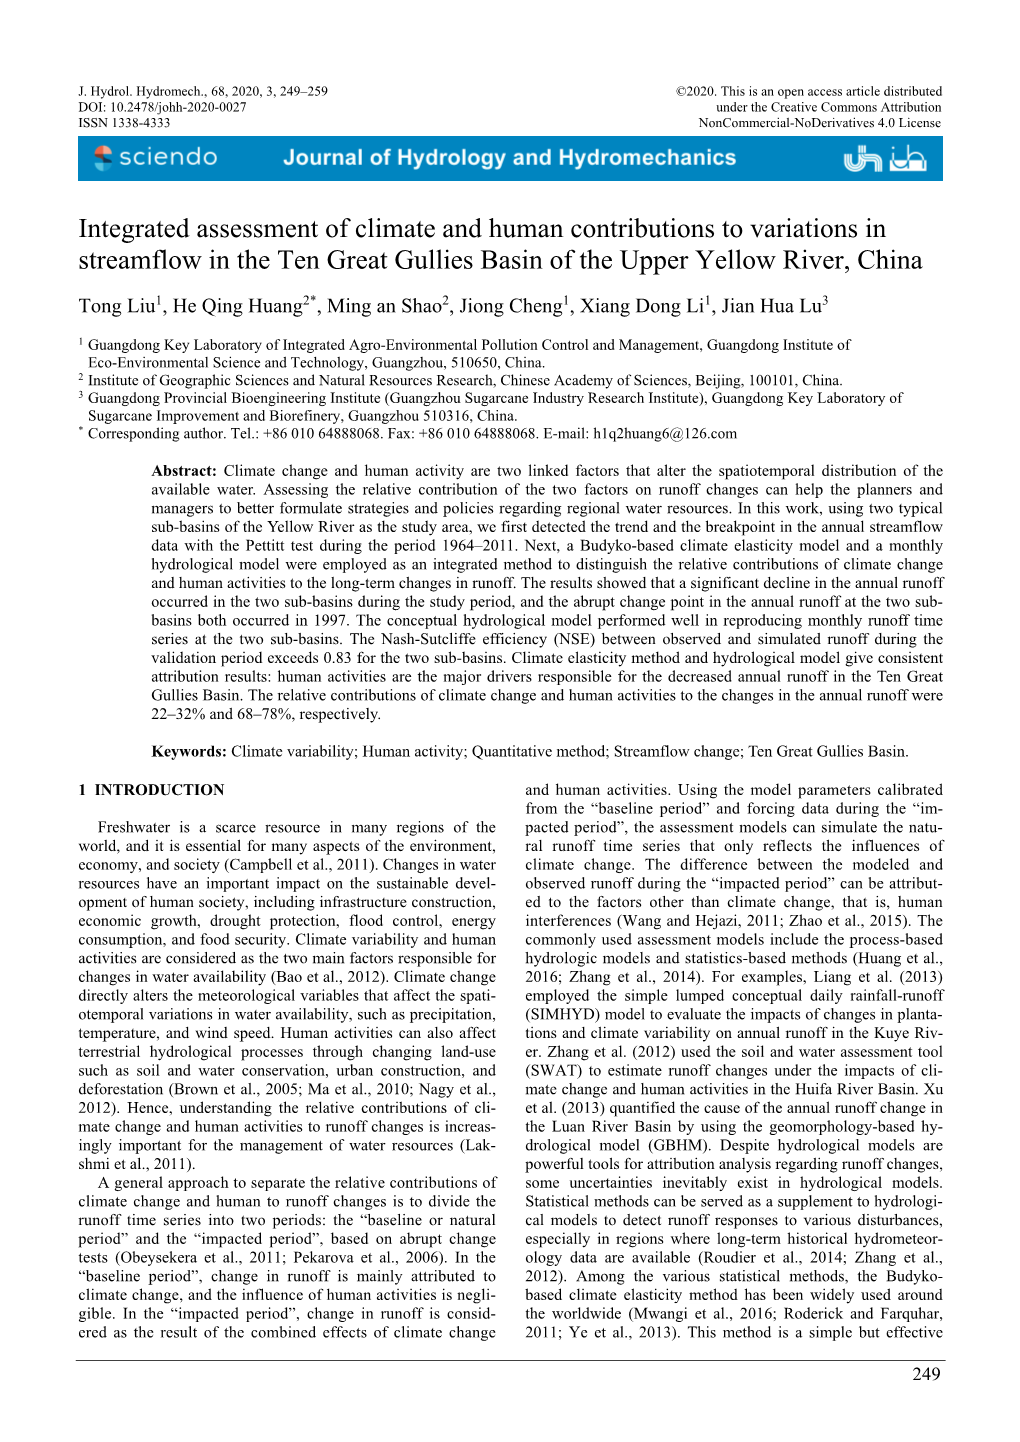 Integrated Assessment of Climate and Human Contributions to Variations in Streamflow in the Ten Great Gullies Basin of the Upper Yellow River, China